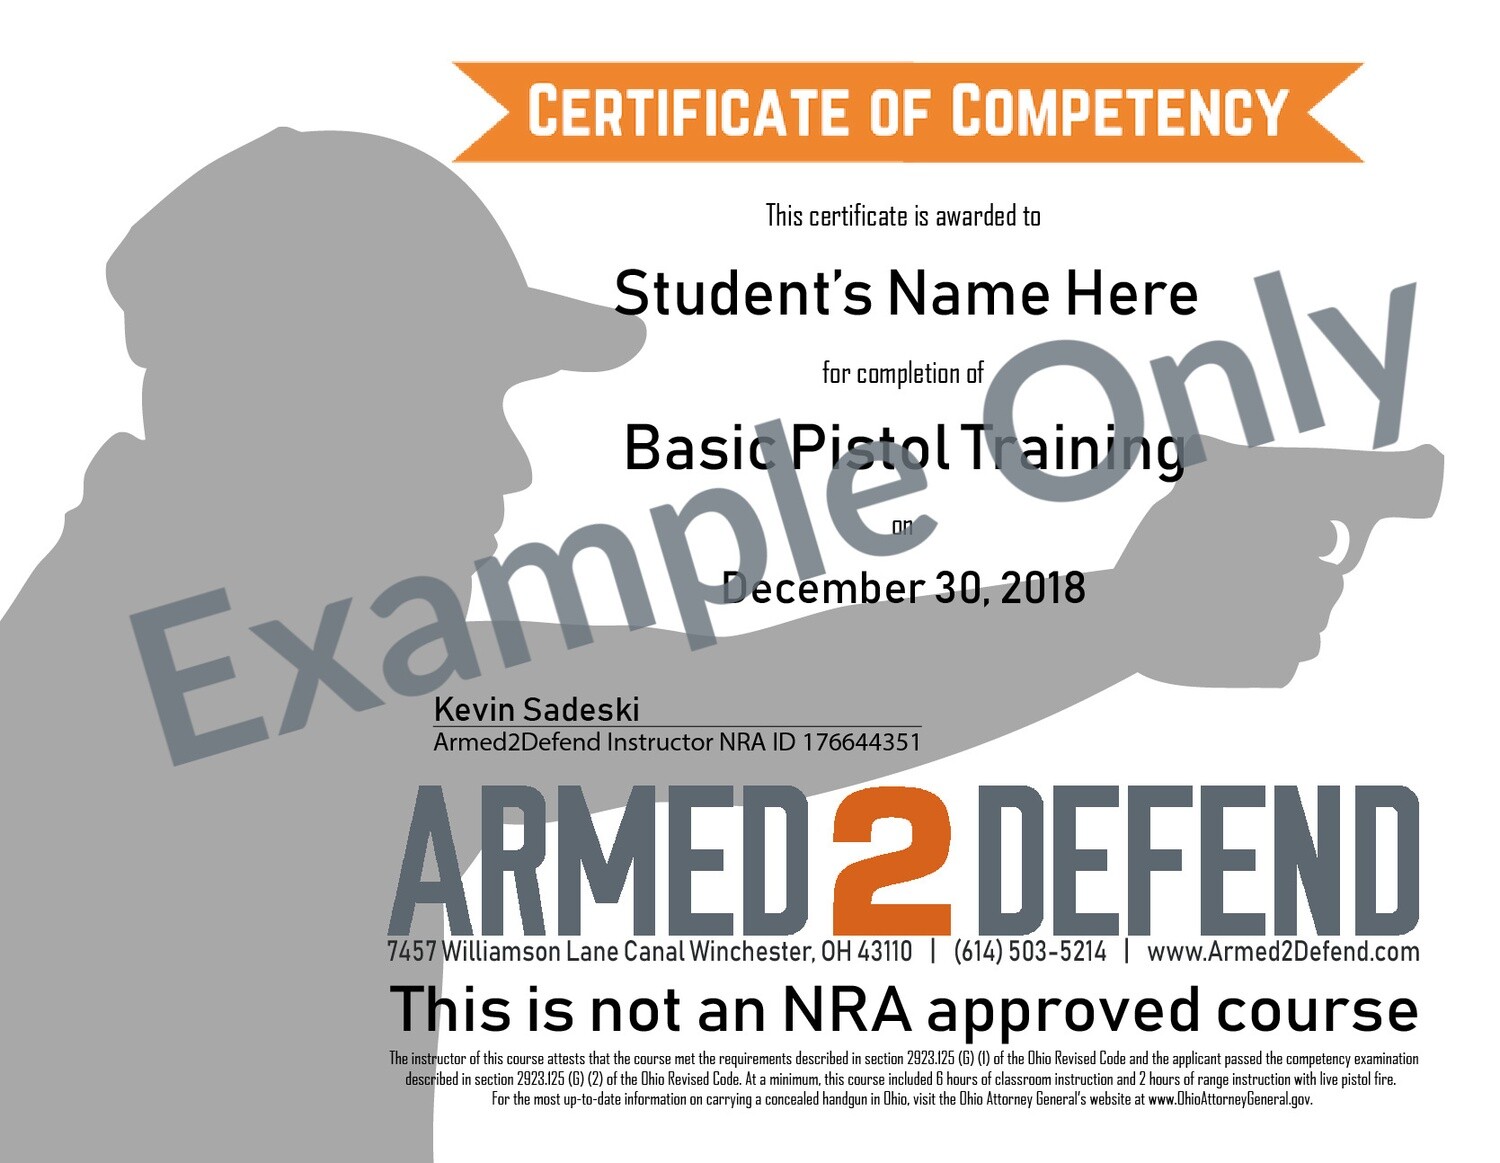 Course Completion Certificate Mailed